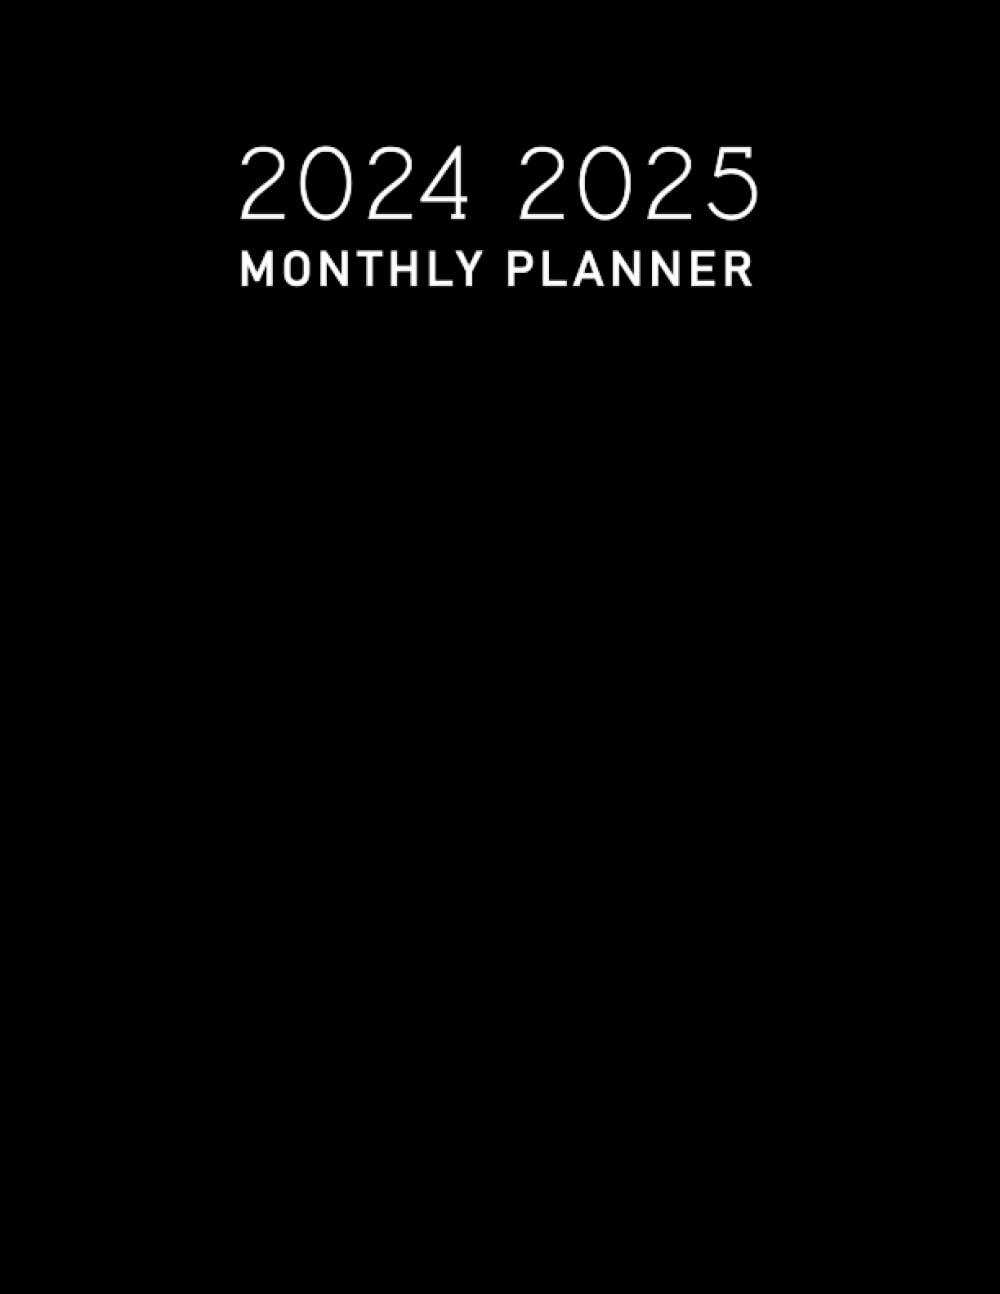 2024-2025 Monthly Planner: Large Two Year Schedule Organizer with Black Cover (January 2024 through December 2025).